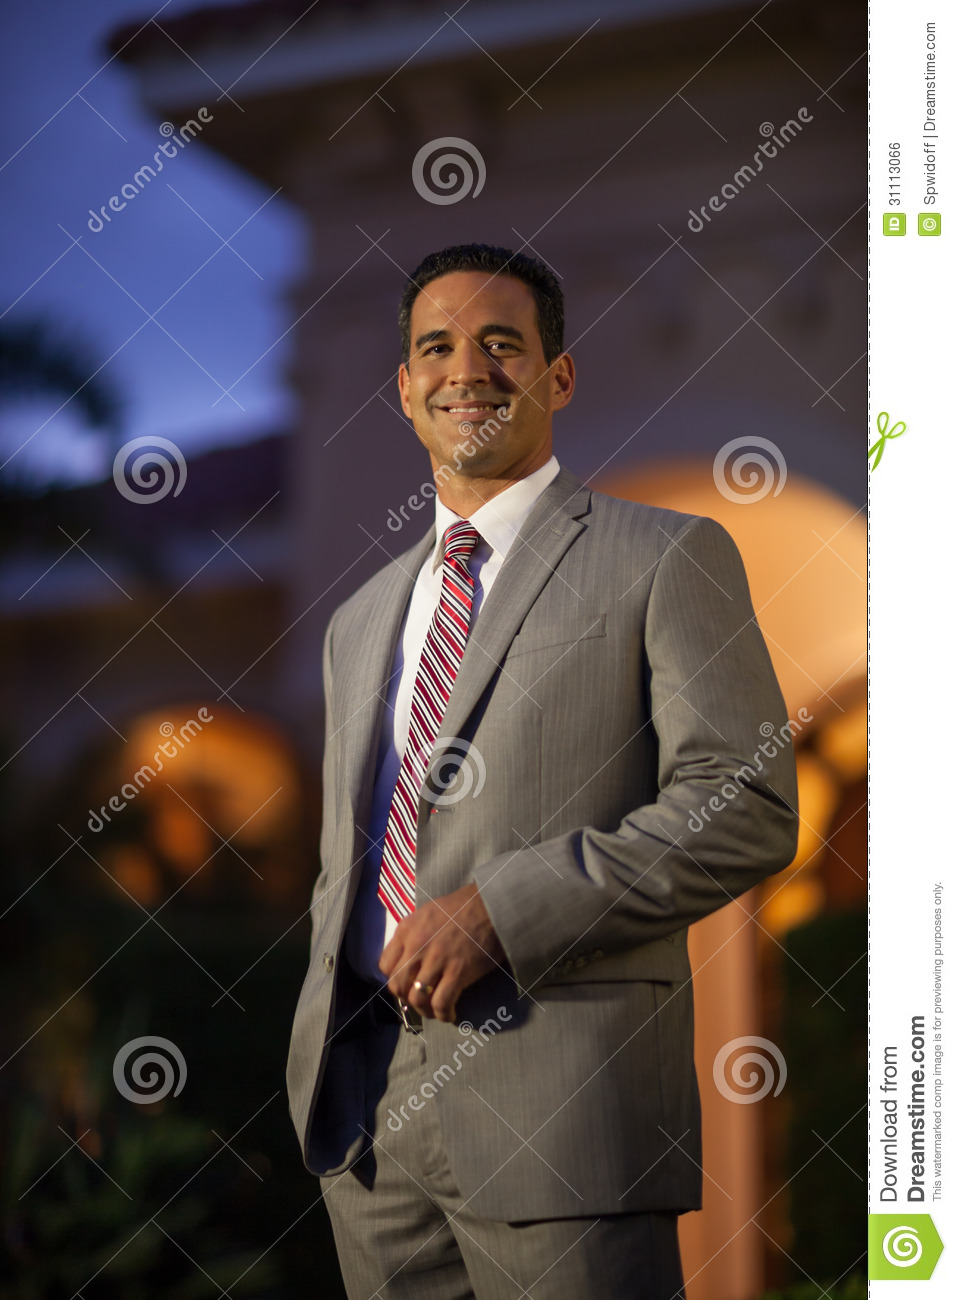 Handsome Brunette Hispanic Man Smiling Outside In Suit And Tie Infront